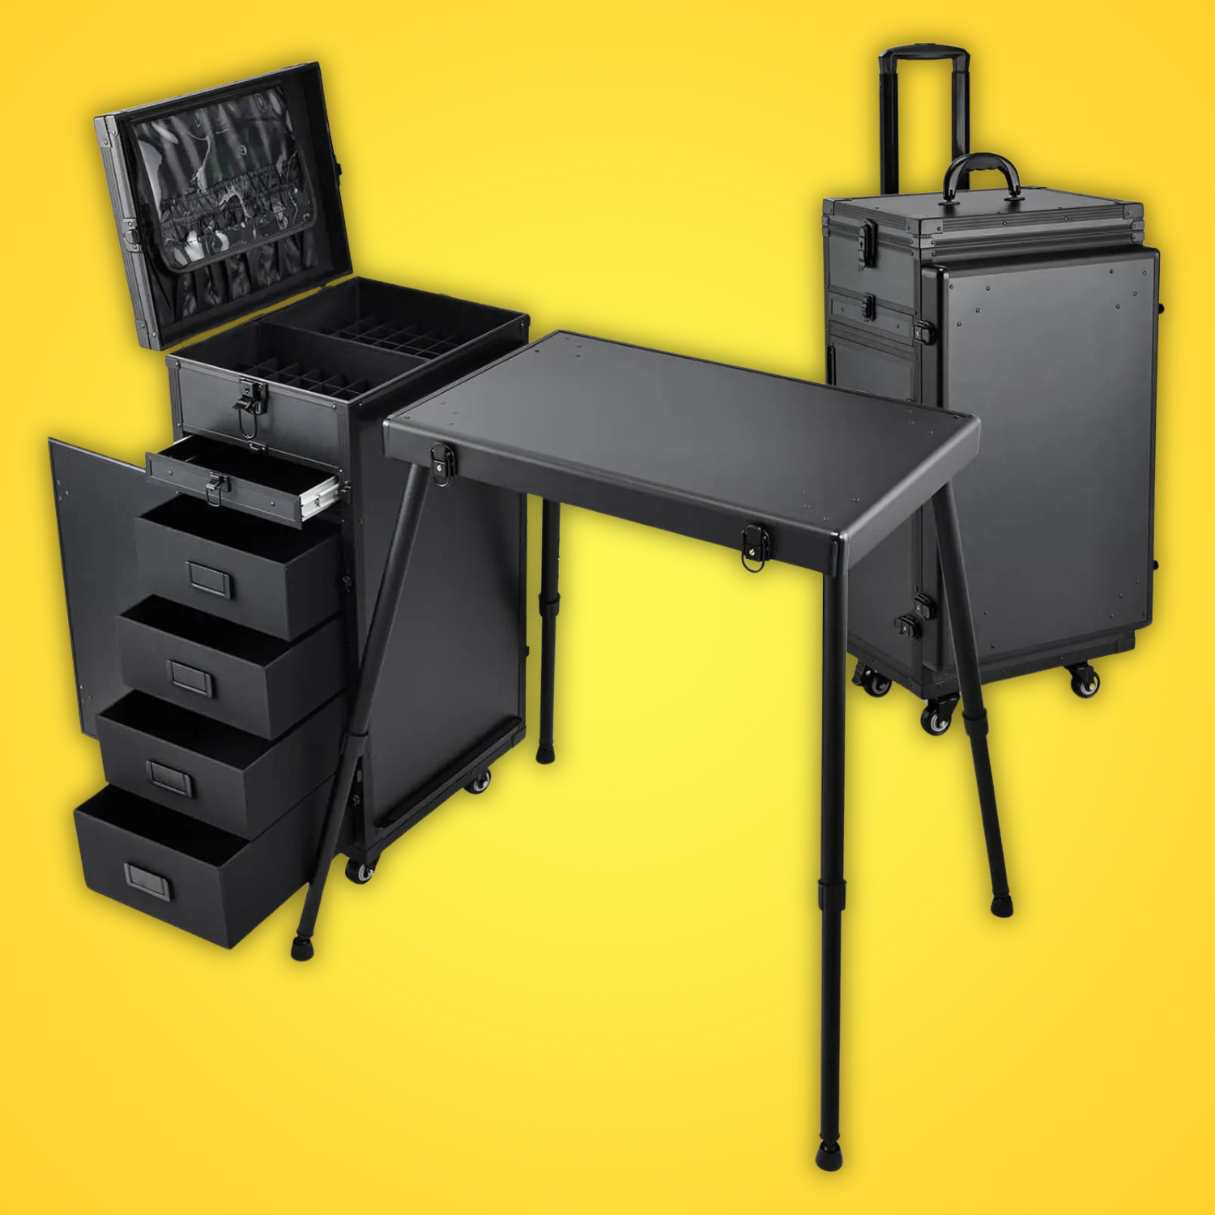 Portable Tattoo Workstation Table with Foldable Desk, 5 Drawers, and Rolling Wheels - Tattoo Artist Case